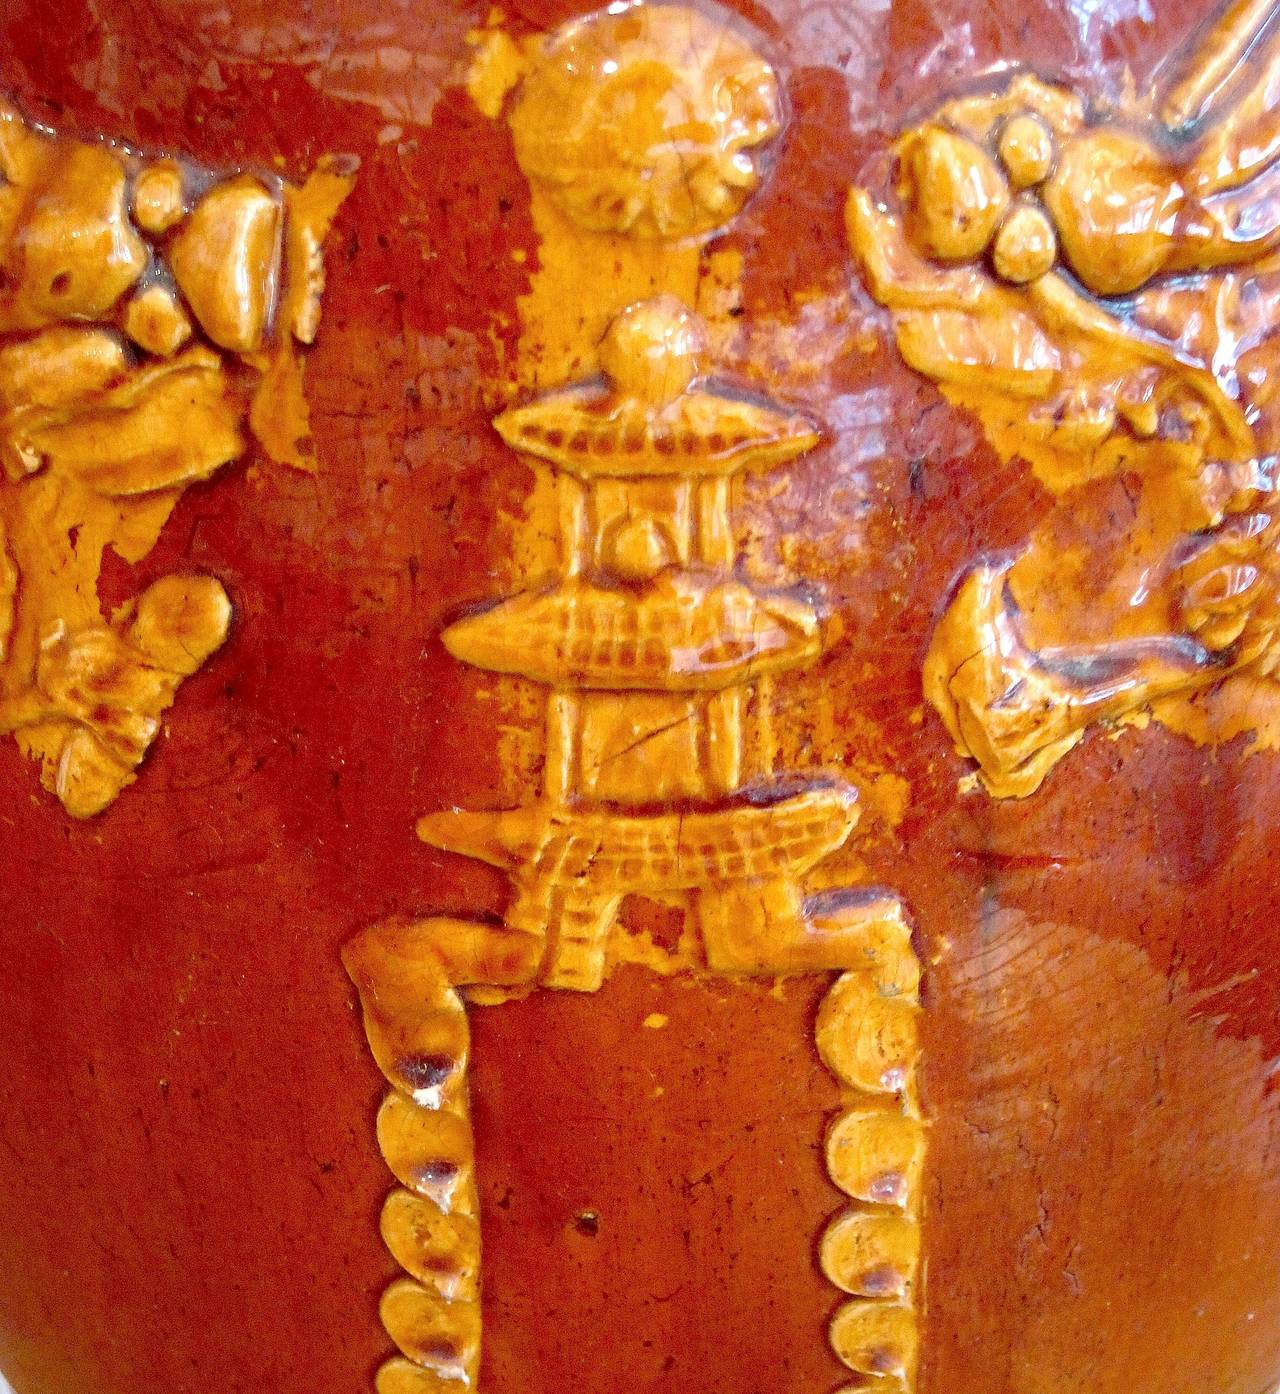 This monumental Korean kimchi (spicy fermented cabbage) storage jar truly has an impressive, almost regal presence. It is made of heavy, clear glazed terra cotta and has applied decoration in the form of two large dragons facing a temple, with hand